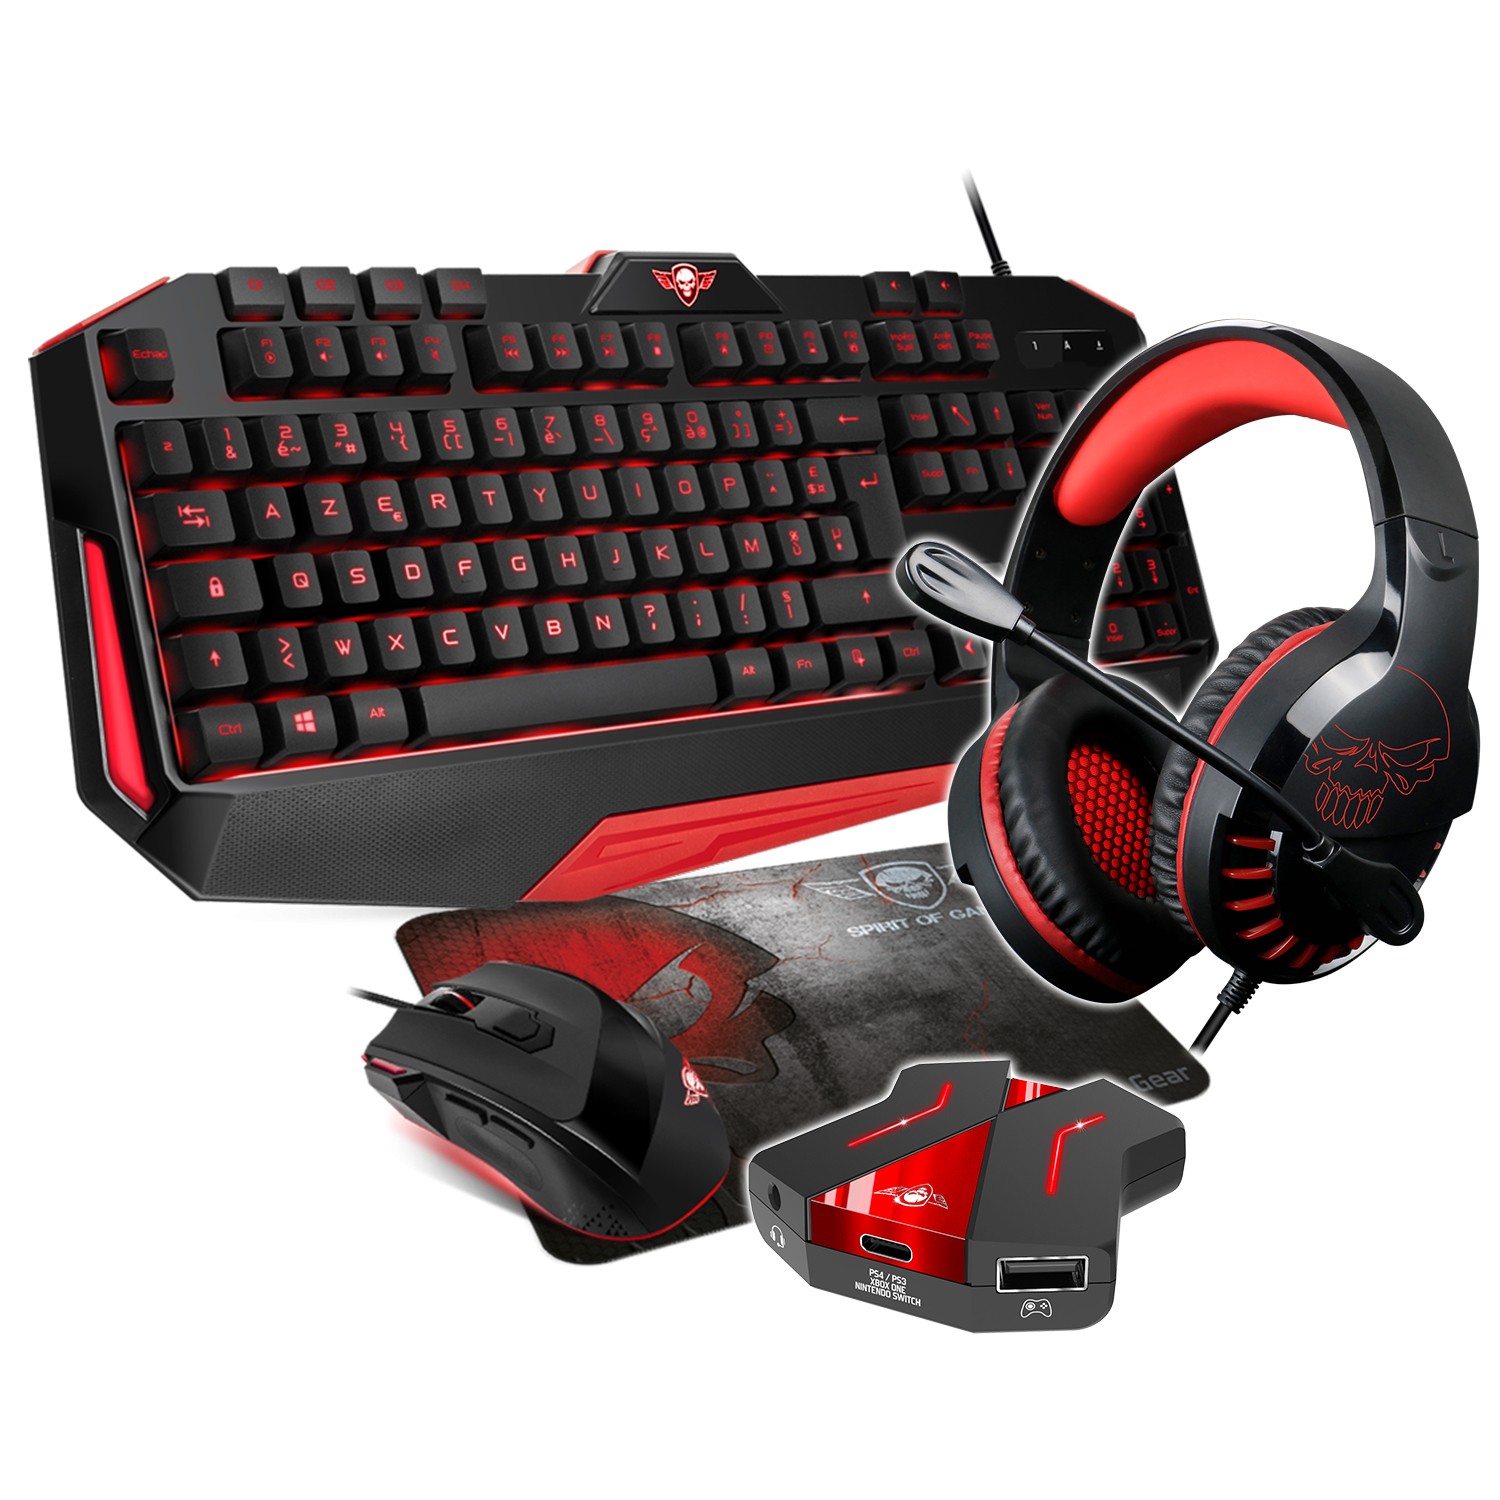 Pack Clavier Souris Tapis Gamer PRO RAPID FIRE + Convertisseur Switch, PS4,  PS3 et Xbox One